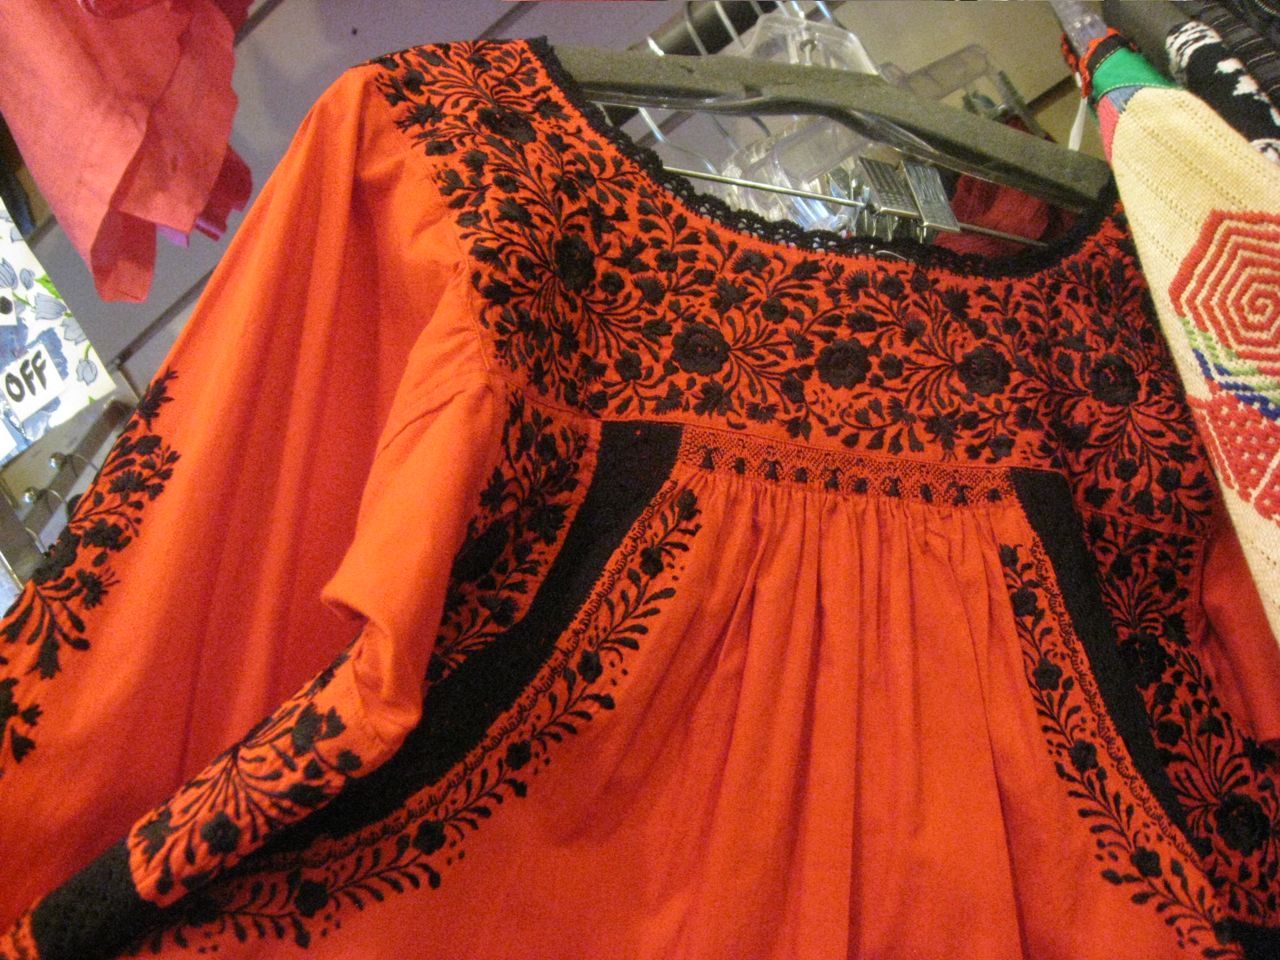 Beautiful Red Huipil with Exquisite Black Embroidery and Crocheted Lace